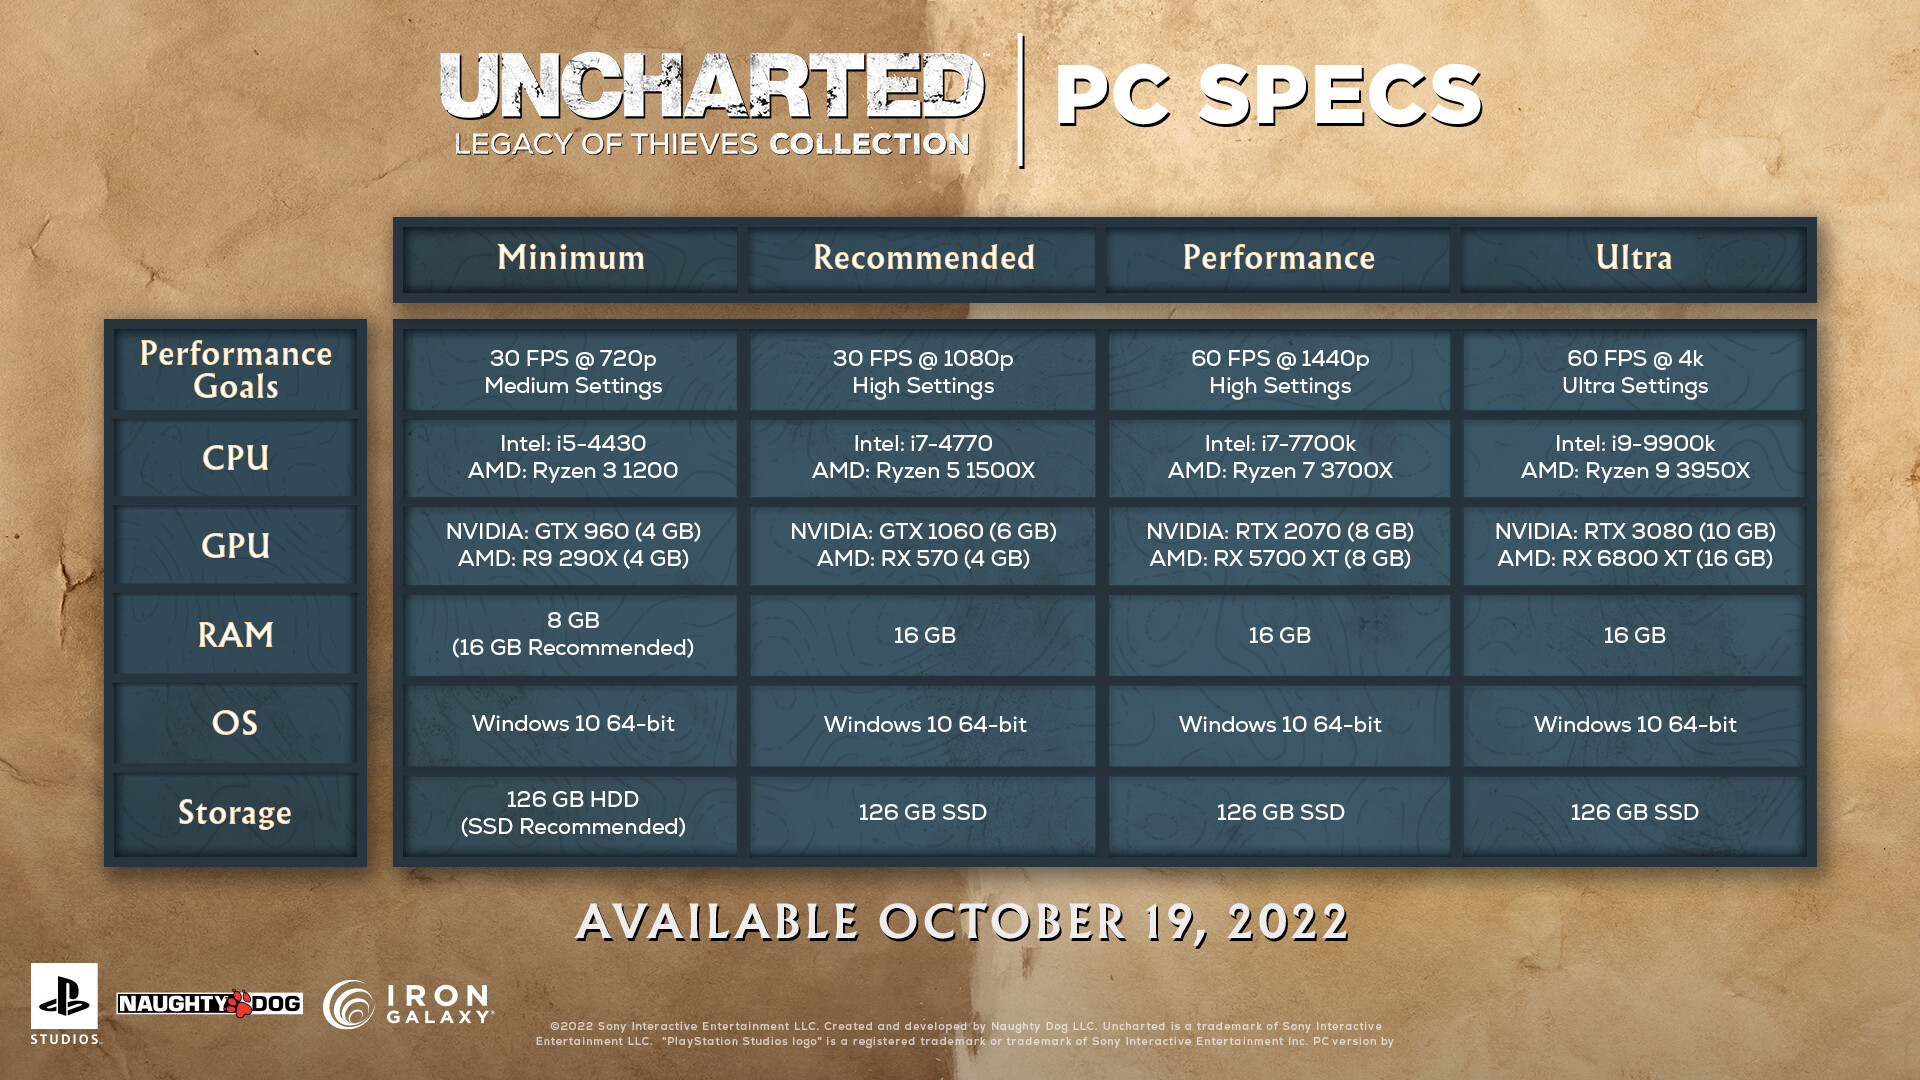 System requirements for Uncharted Legacy of Thieves on PC.